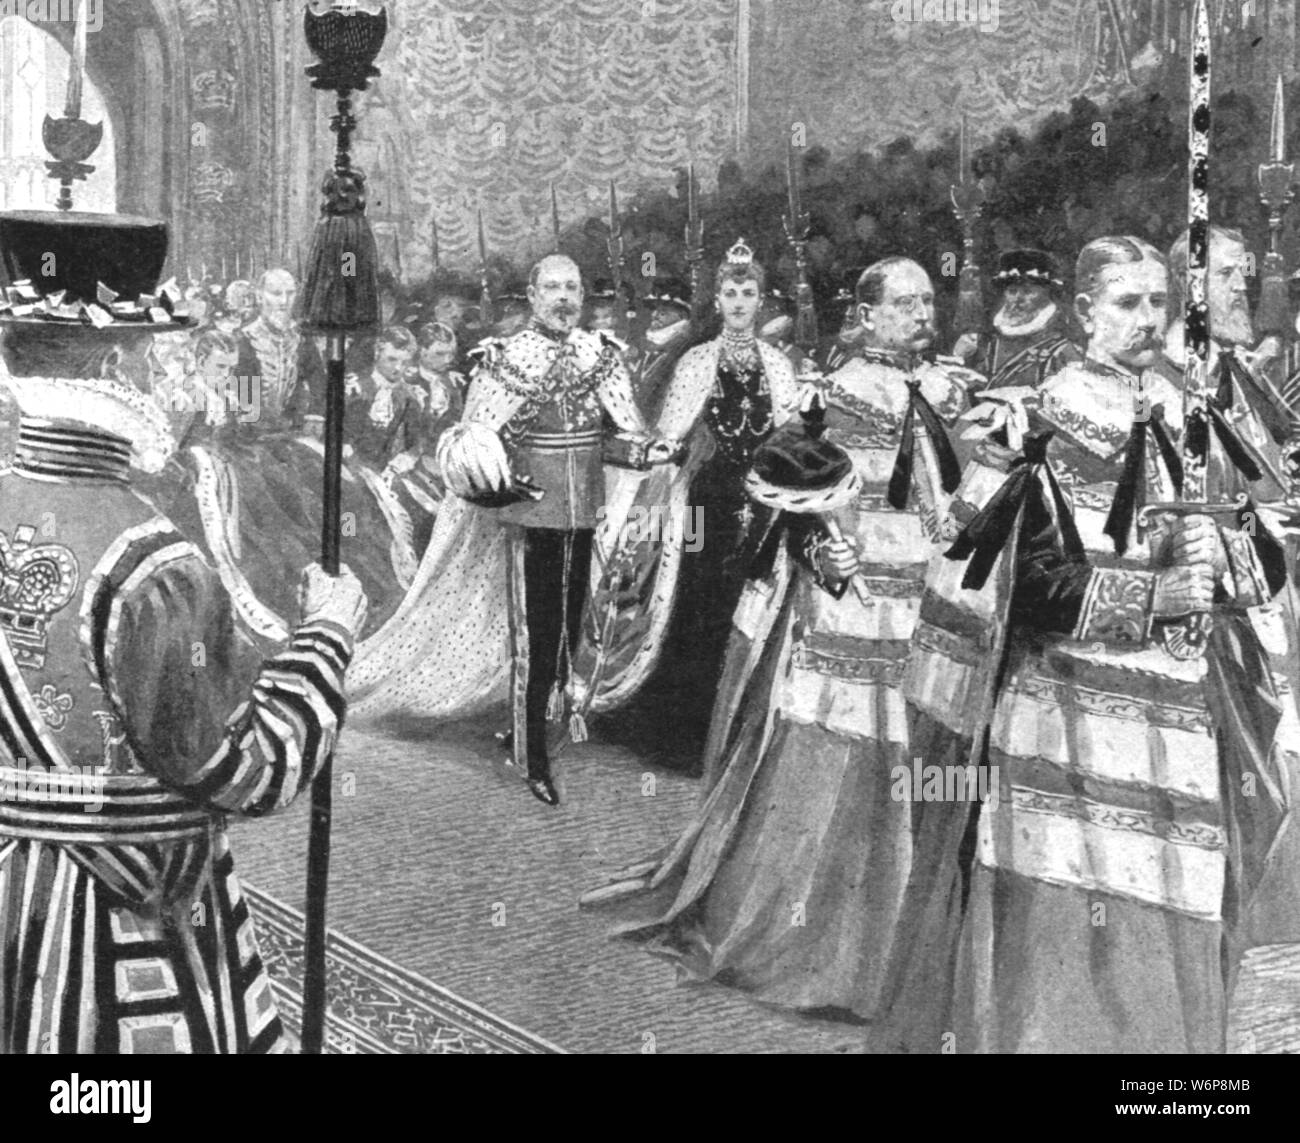 'Princess Alexandra as Queen of England: Her Majesty passing through the Royal Gallery at the opening of King Edward VII's First Parliament, February 14, 1901'. King Edward VII (1841-1910) and his wife Alexandra of Denmark (1844-1925) in the Houses of Parliament in Westminster. On the death of his mother Queen Victoria on 22 January 1901, Edward became King of the United Kingdom, and Alexandra became Queen consort. From &quot;The Illustrated London News Record of the Glorious Reign of Queen Victoria 1837-1901: The Life and Accession of King Edward VII. and the Life of Queen Alexandra&quot;. [L Stock Photo